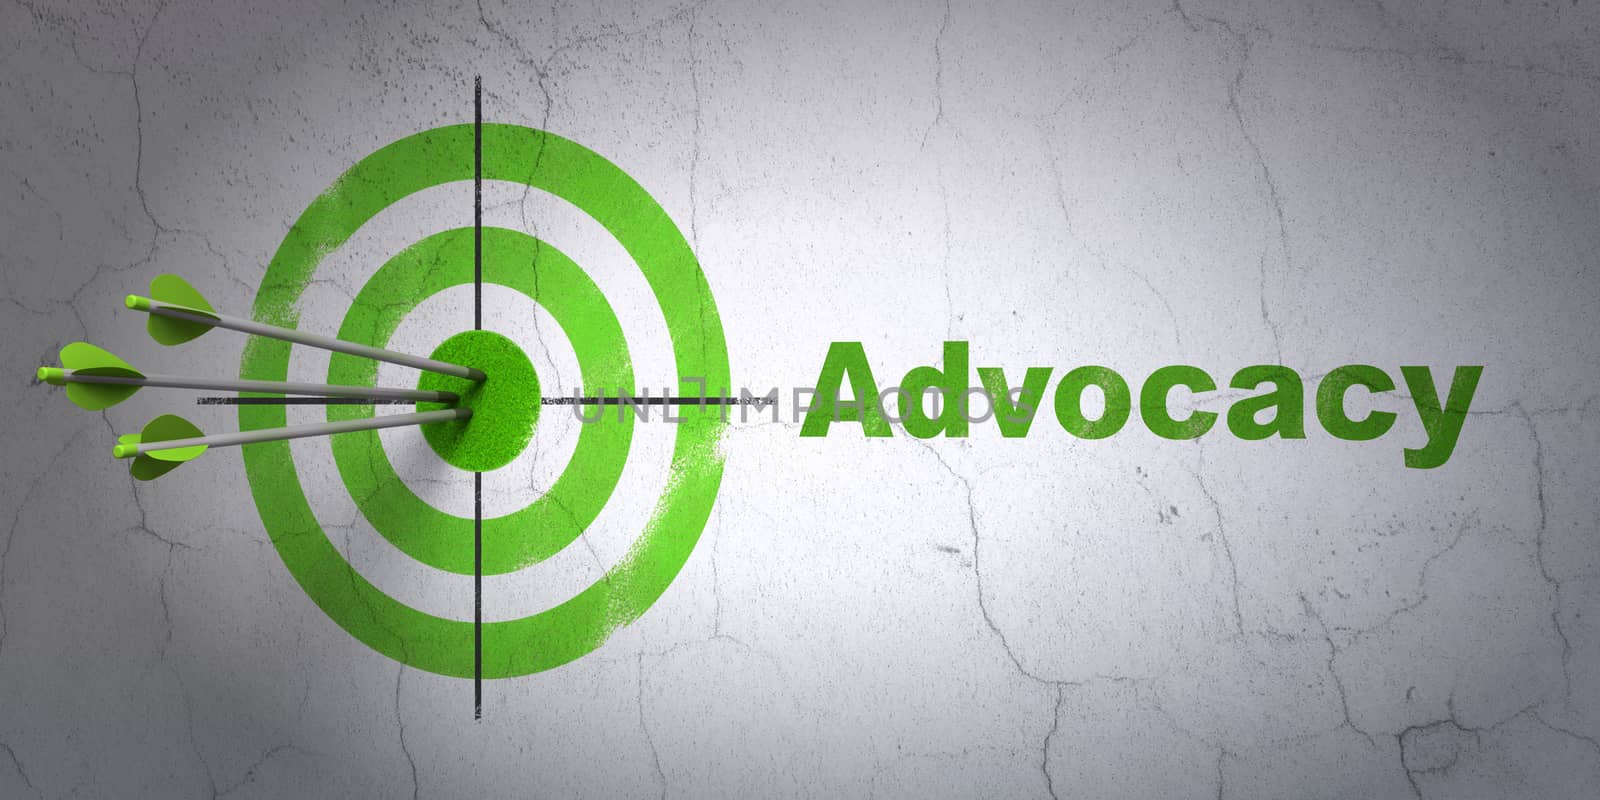 Success law concept: arrows hitting the center of target, Green Advocacy on wall background, 3d render